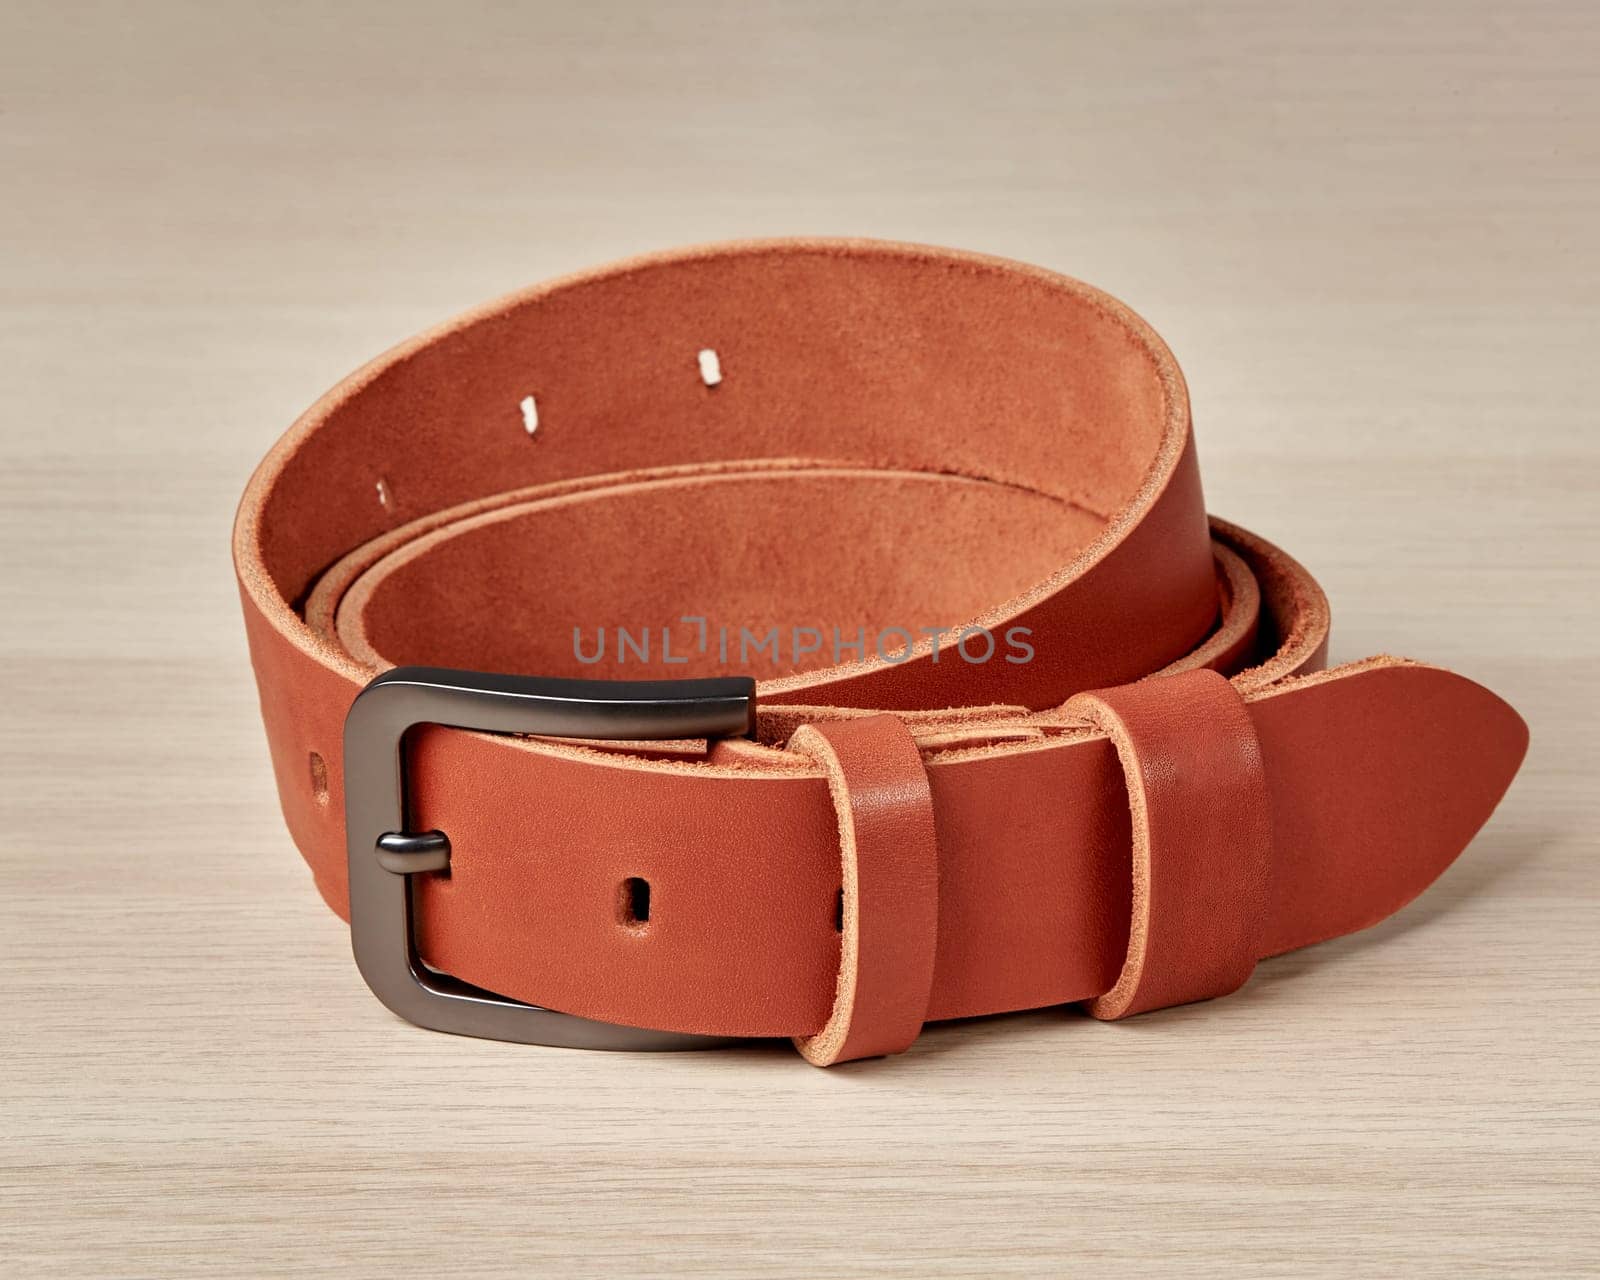 Folded artisan terracotta leather belt with DAD inscription on loop by nazarovsergey